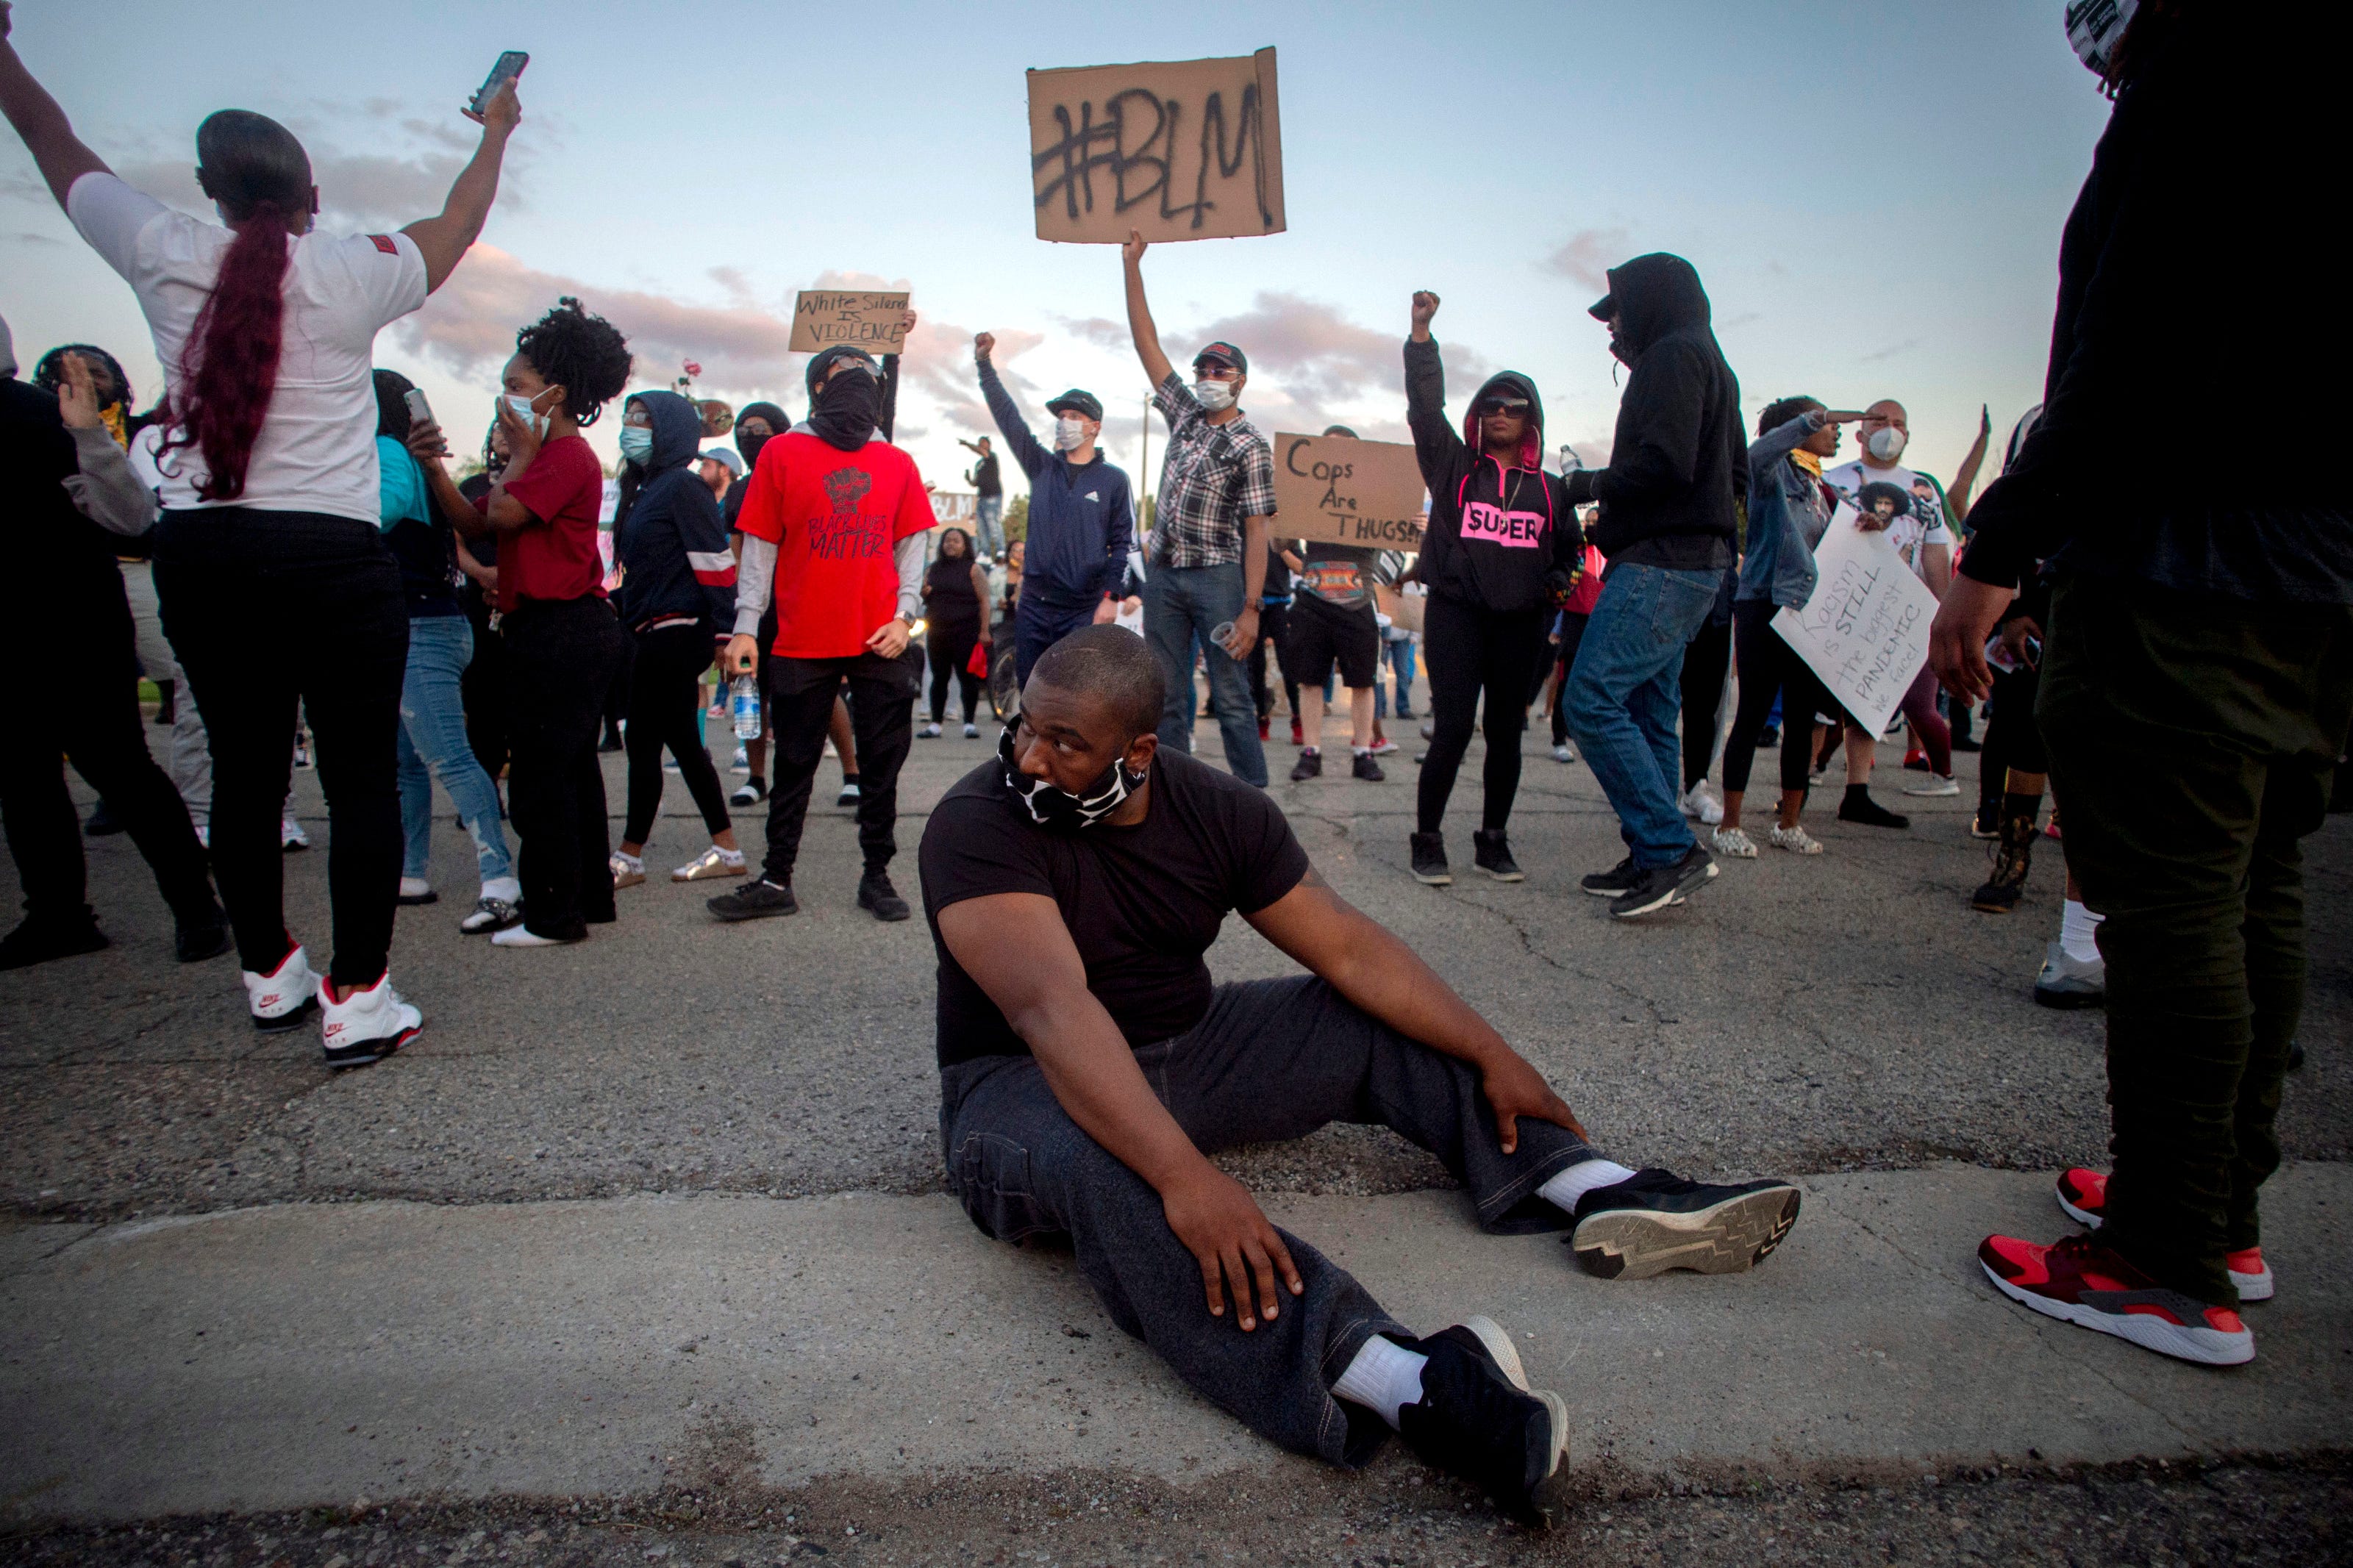 Protesters march during a peaceful protest seeking justice for George Floyd on Saturday, May 30, 2020 on Miller Road in Flint Township, M.I.  Floyd died in police custody on Memorial Day in Minneapolis.